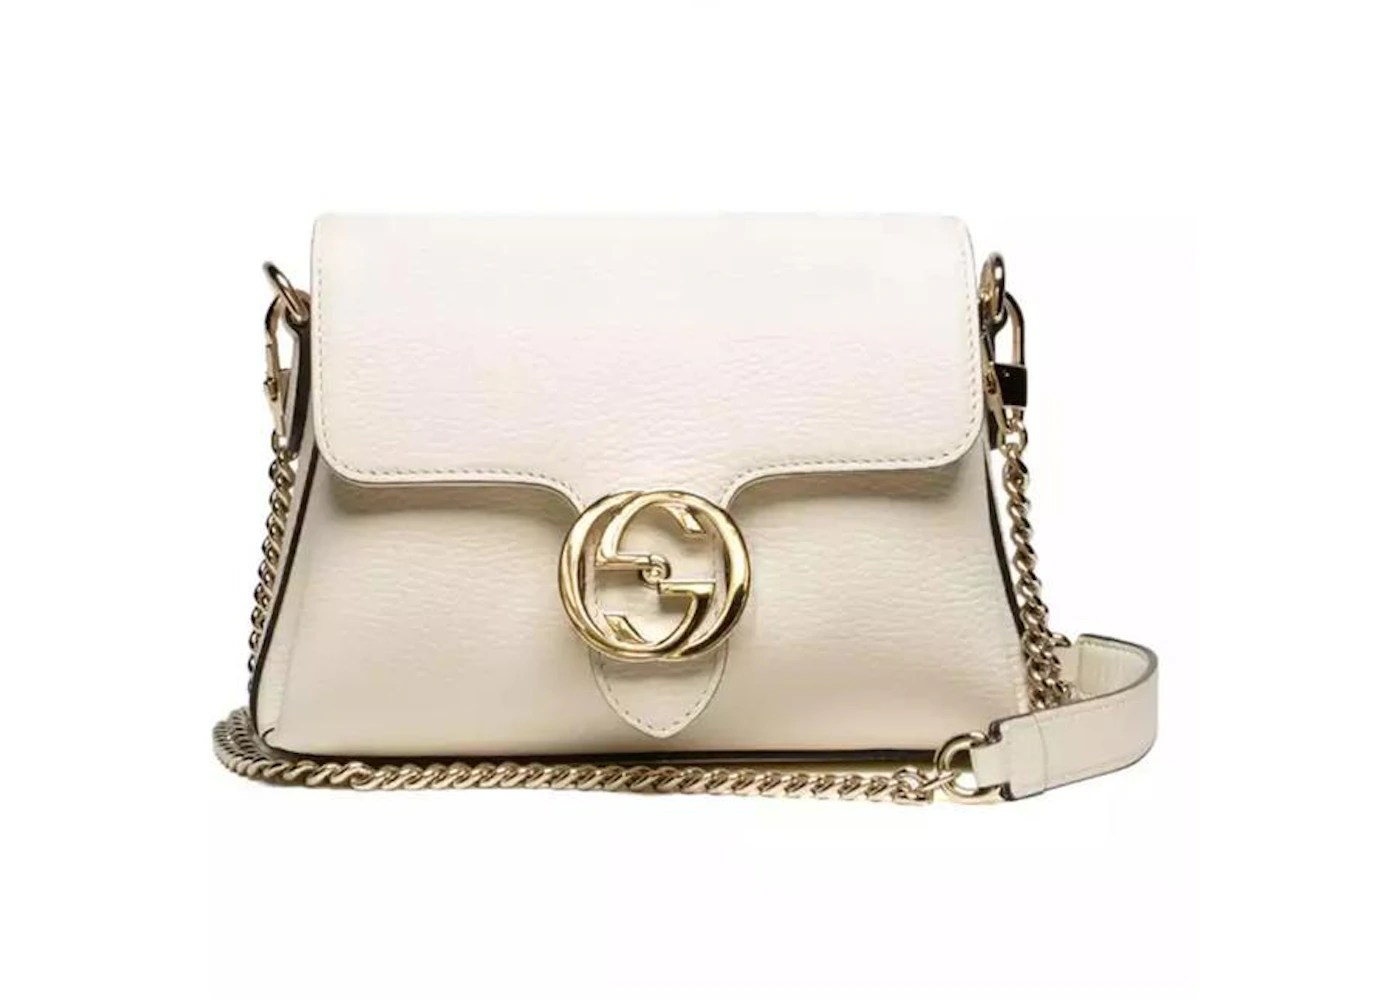 Gucci Interlocking GG Shoulder Bag Mini White in Leather with Gold